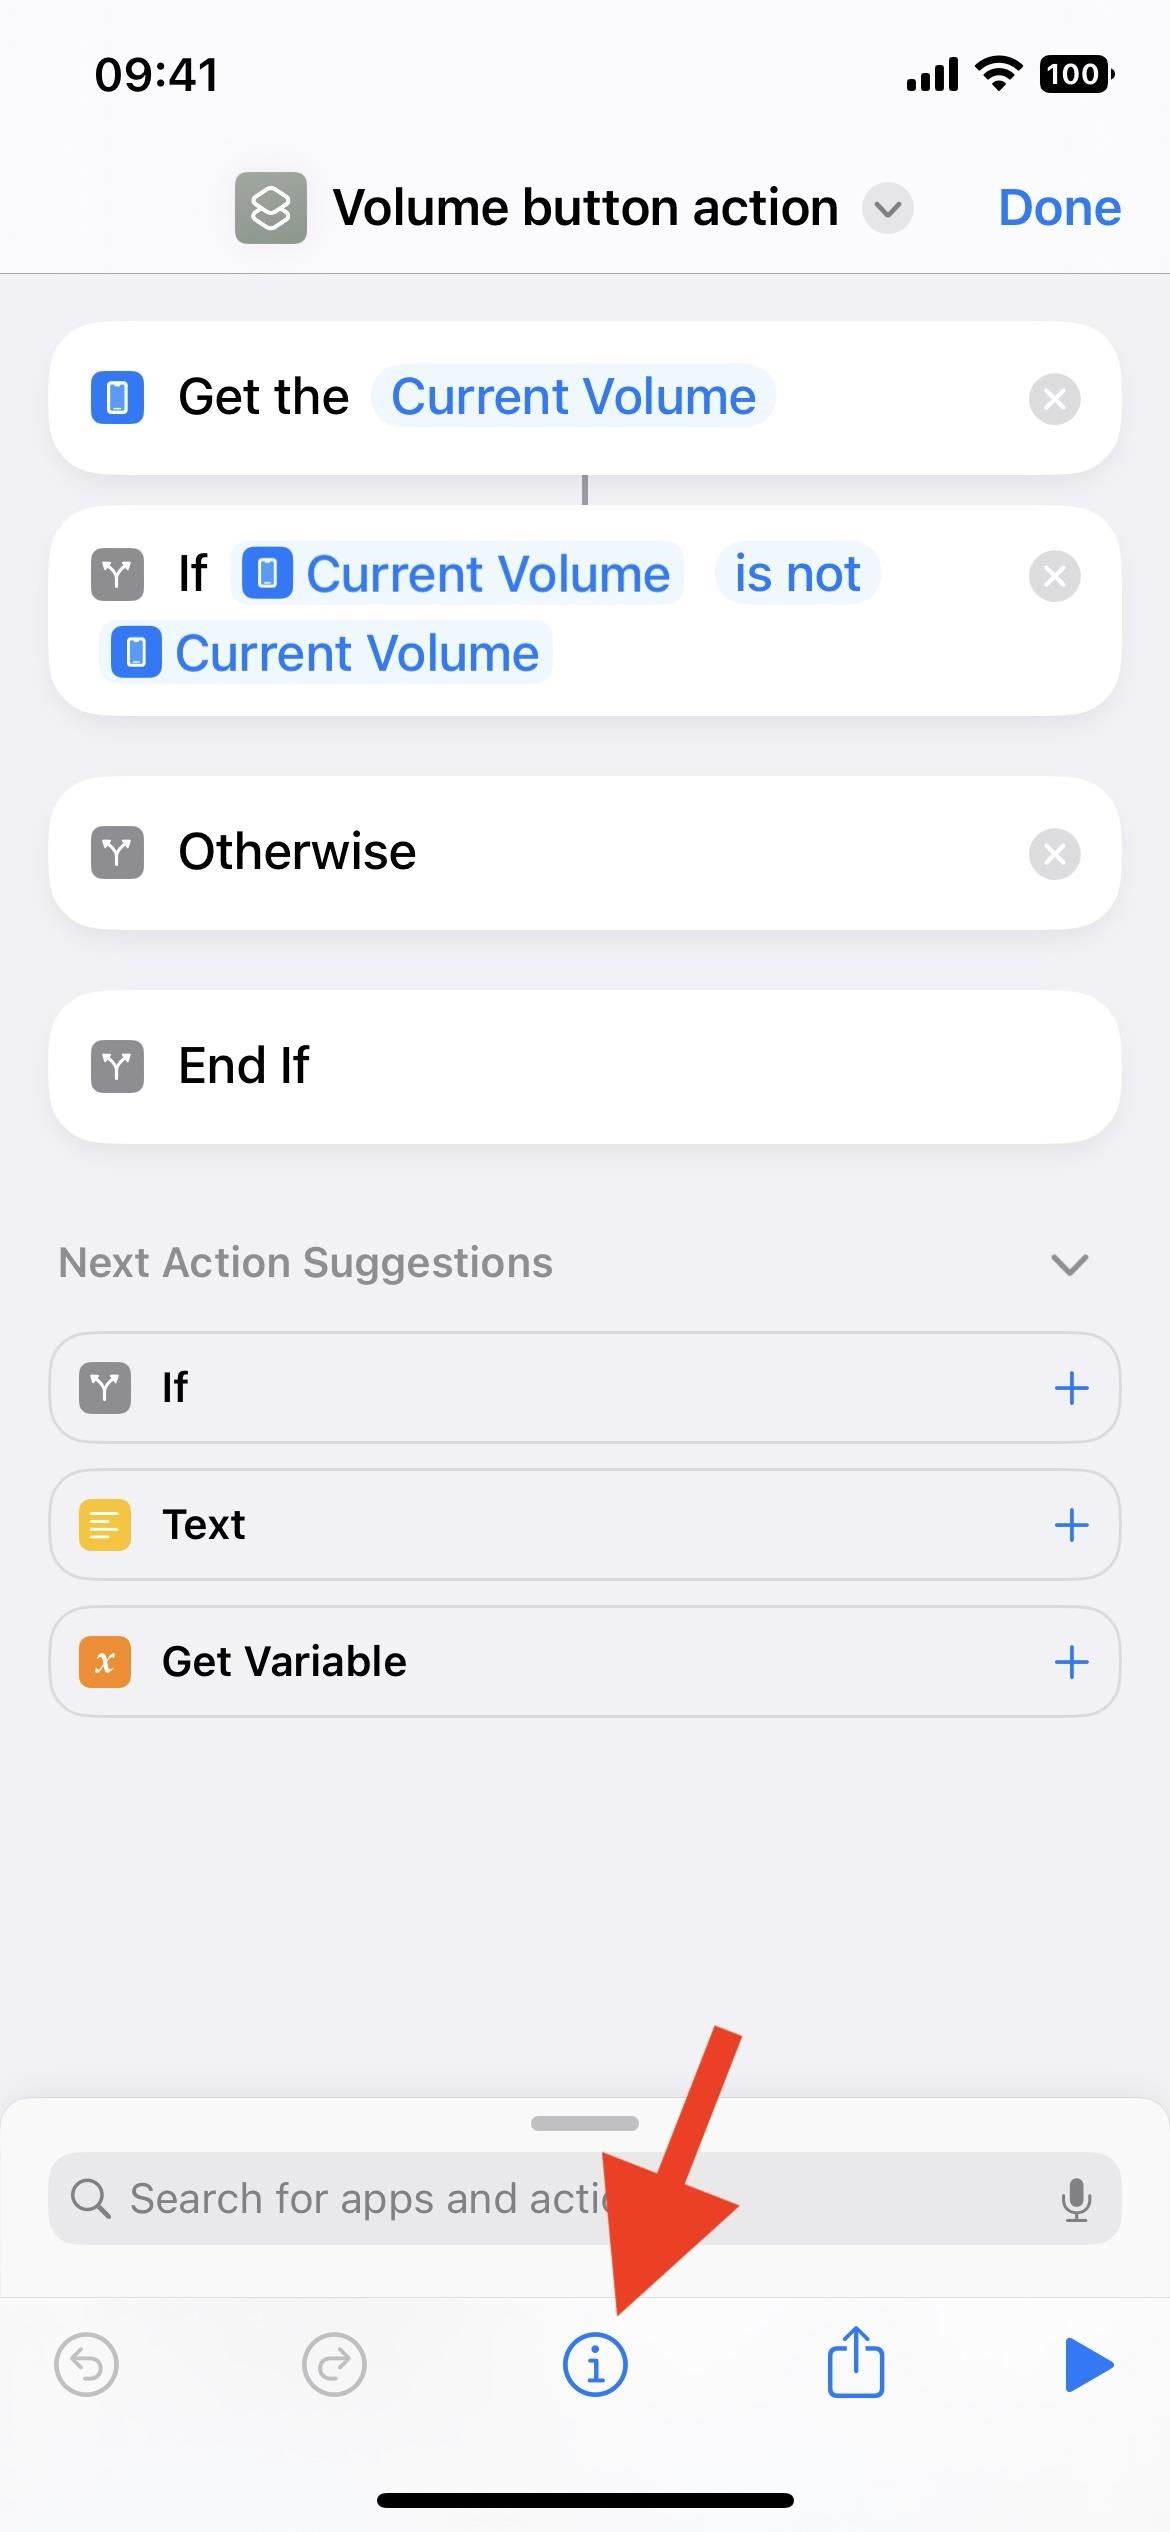 The Big Shortcuts Update for iPhone Is Bursting with New Features You Need to Try Out